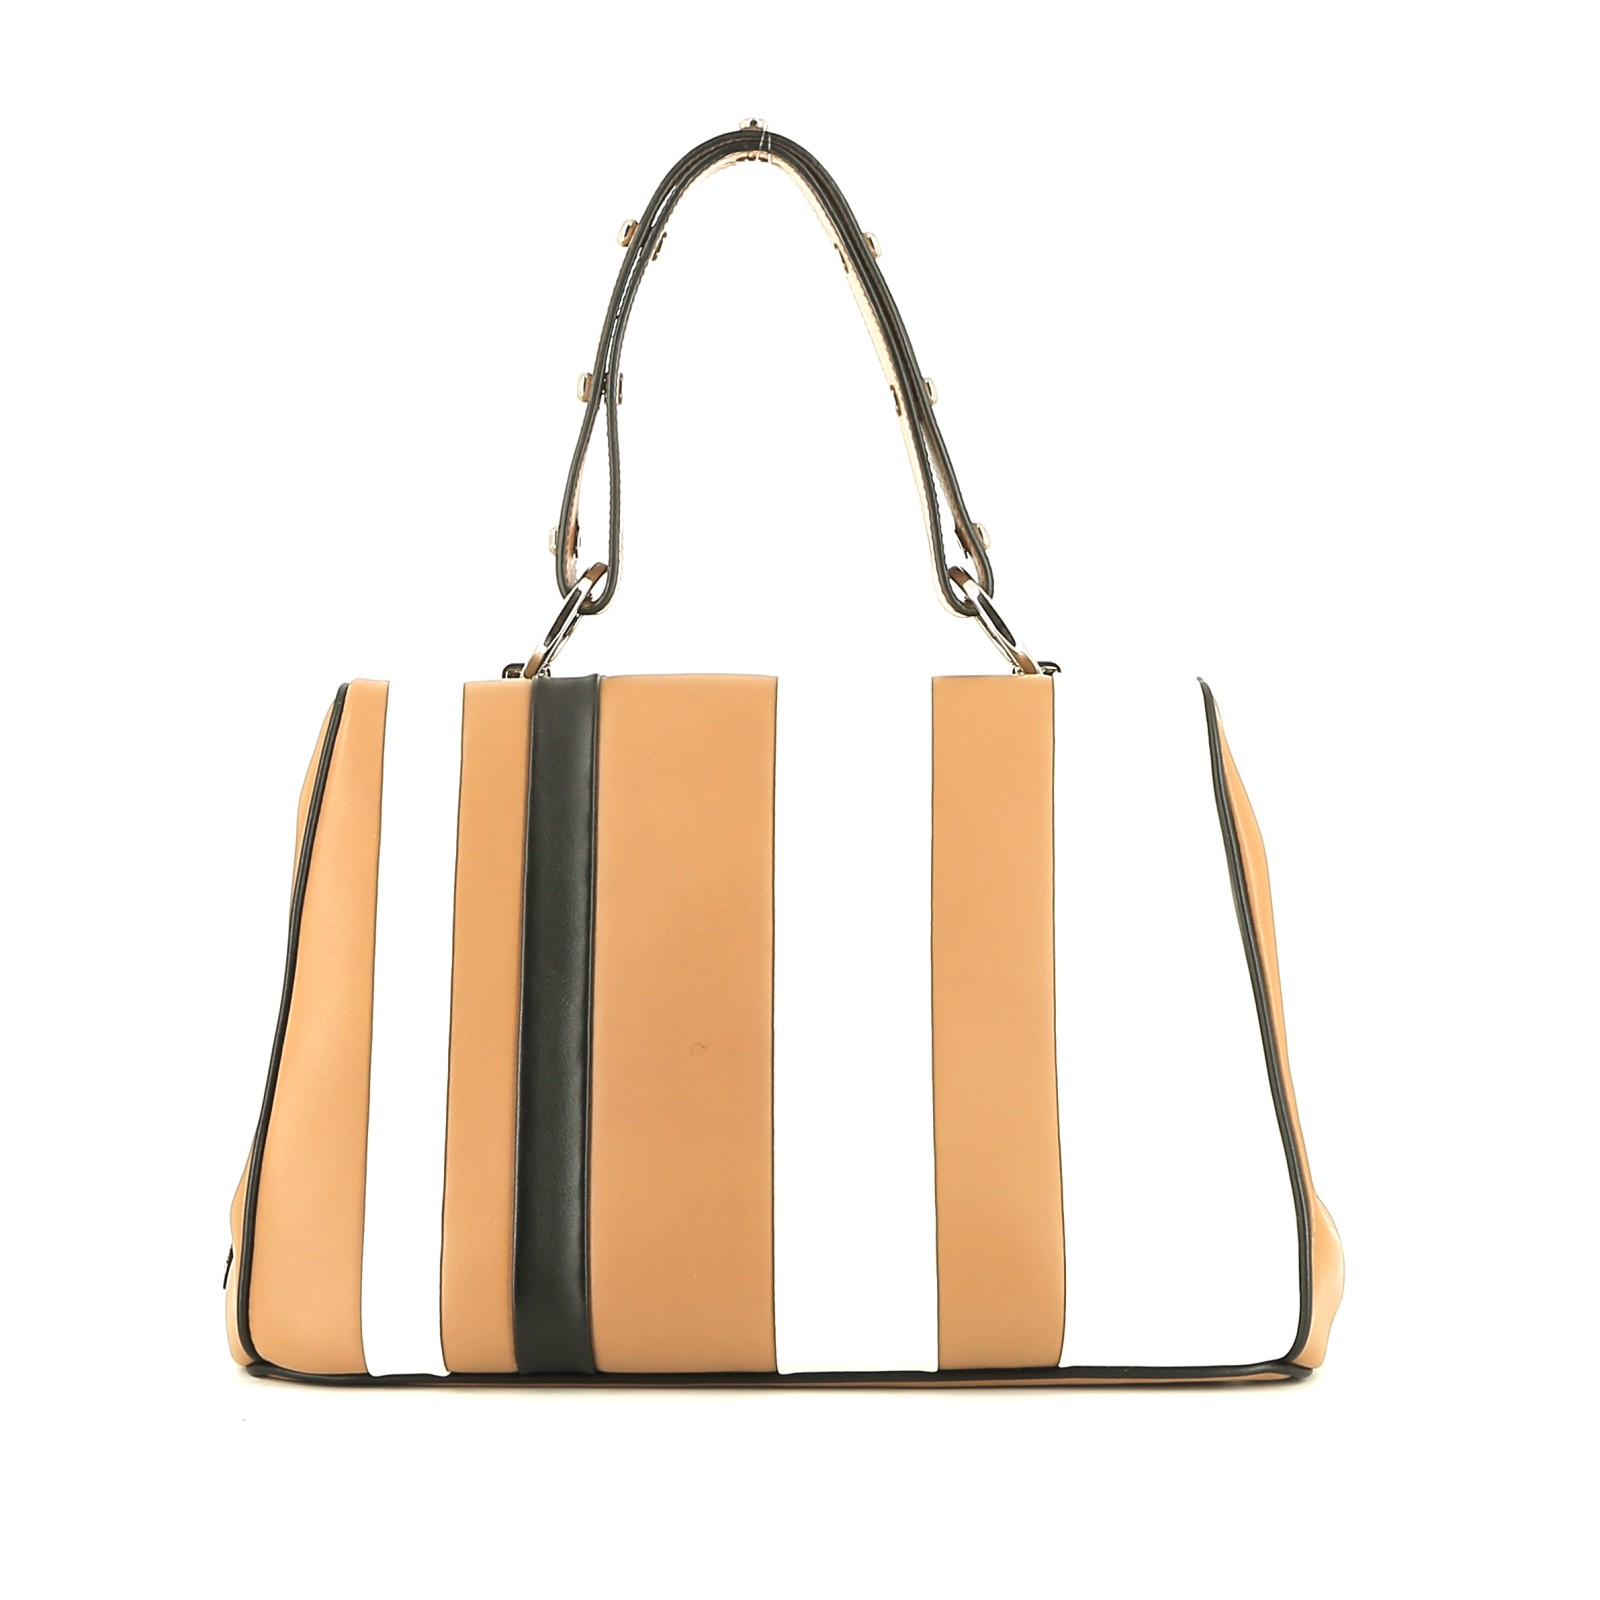 Handbag In Beige, White And Black Tricolor Leather